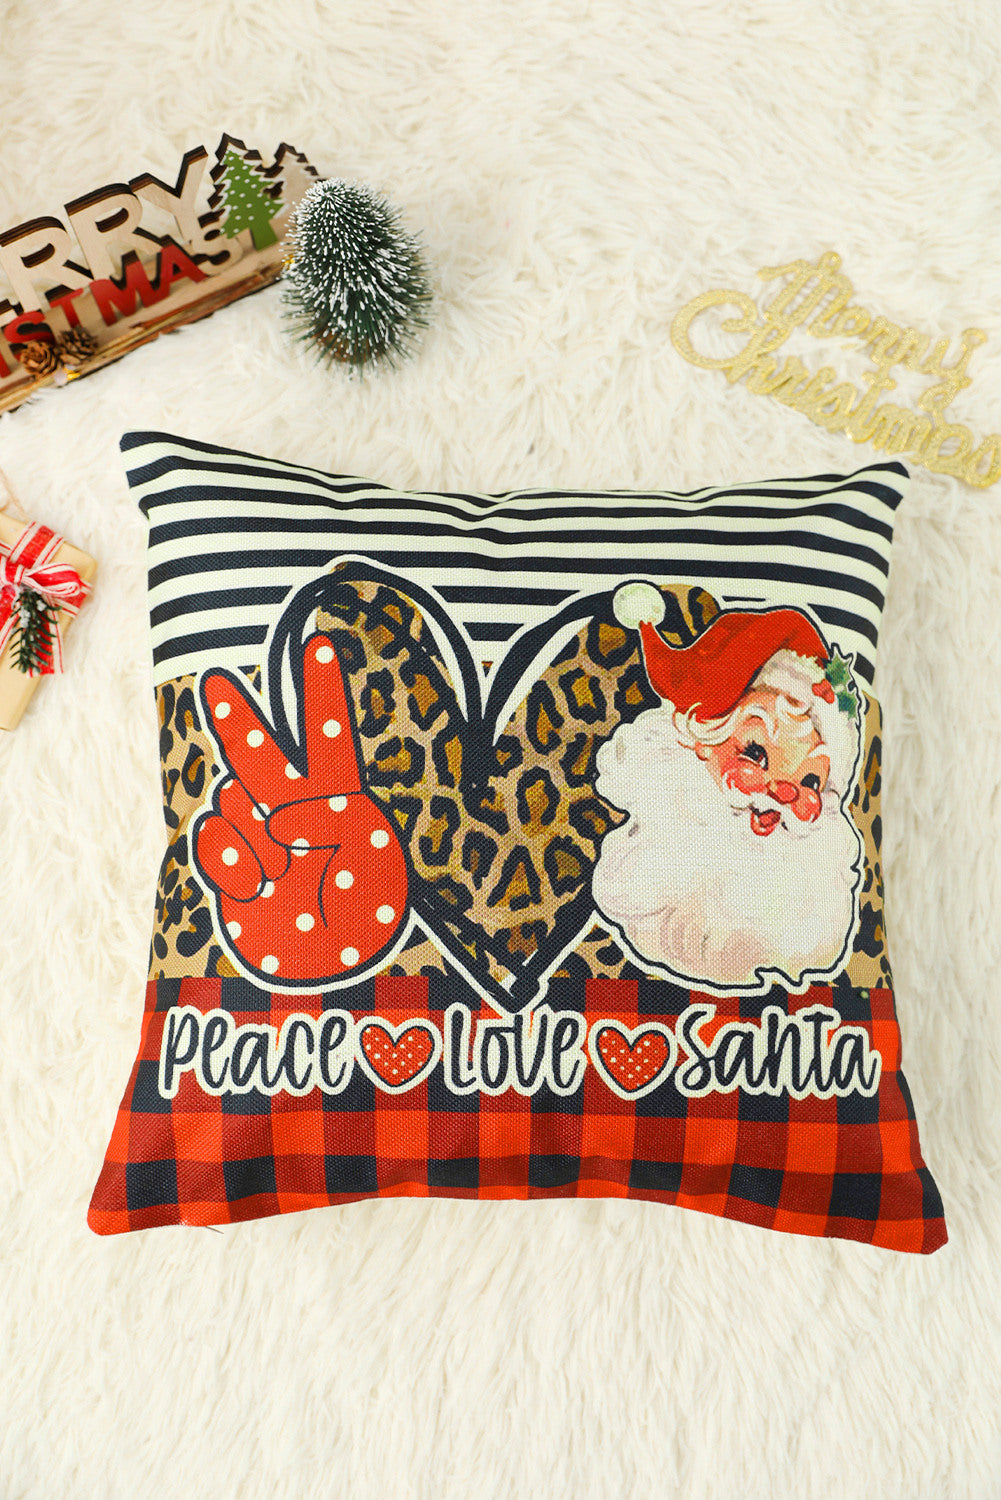 Christmas Santa Striped Plaid Graphic Holiday Pillow Cover Decoration